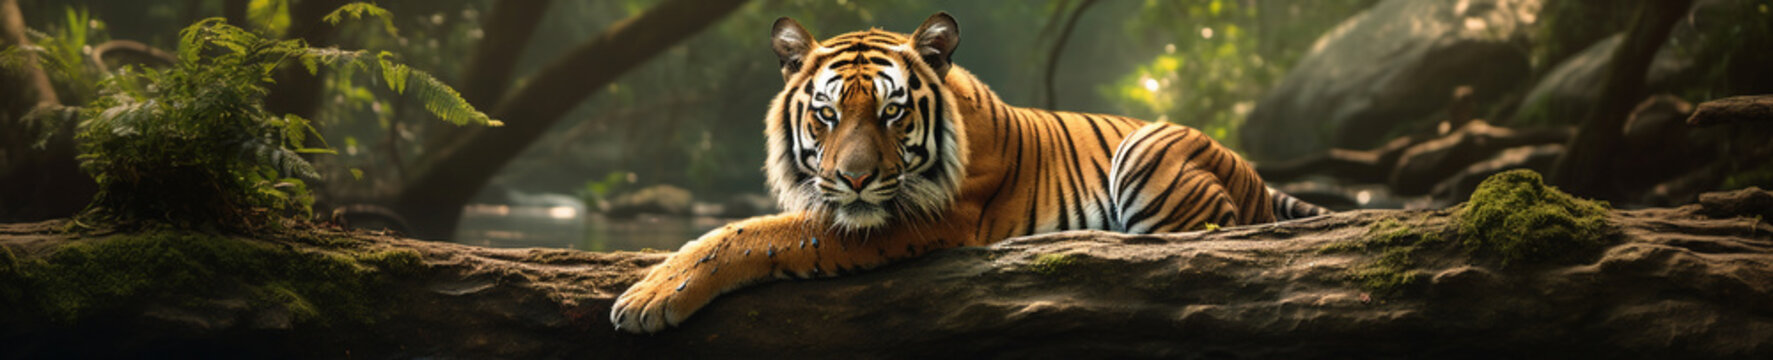 A Banner Photo of a Tiger in Nature